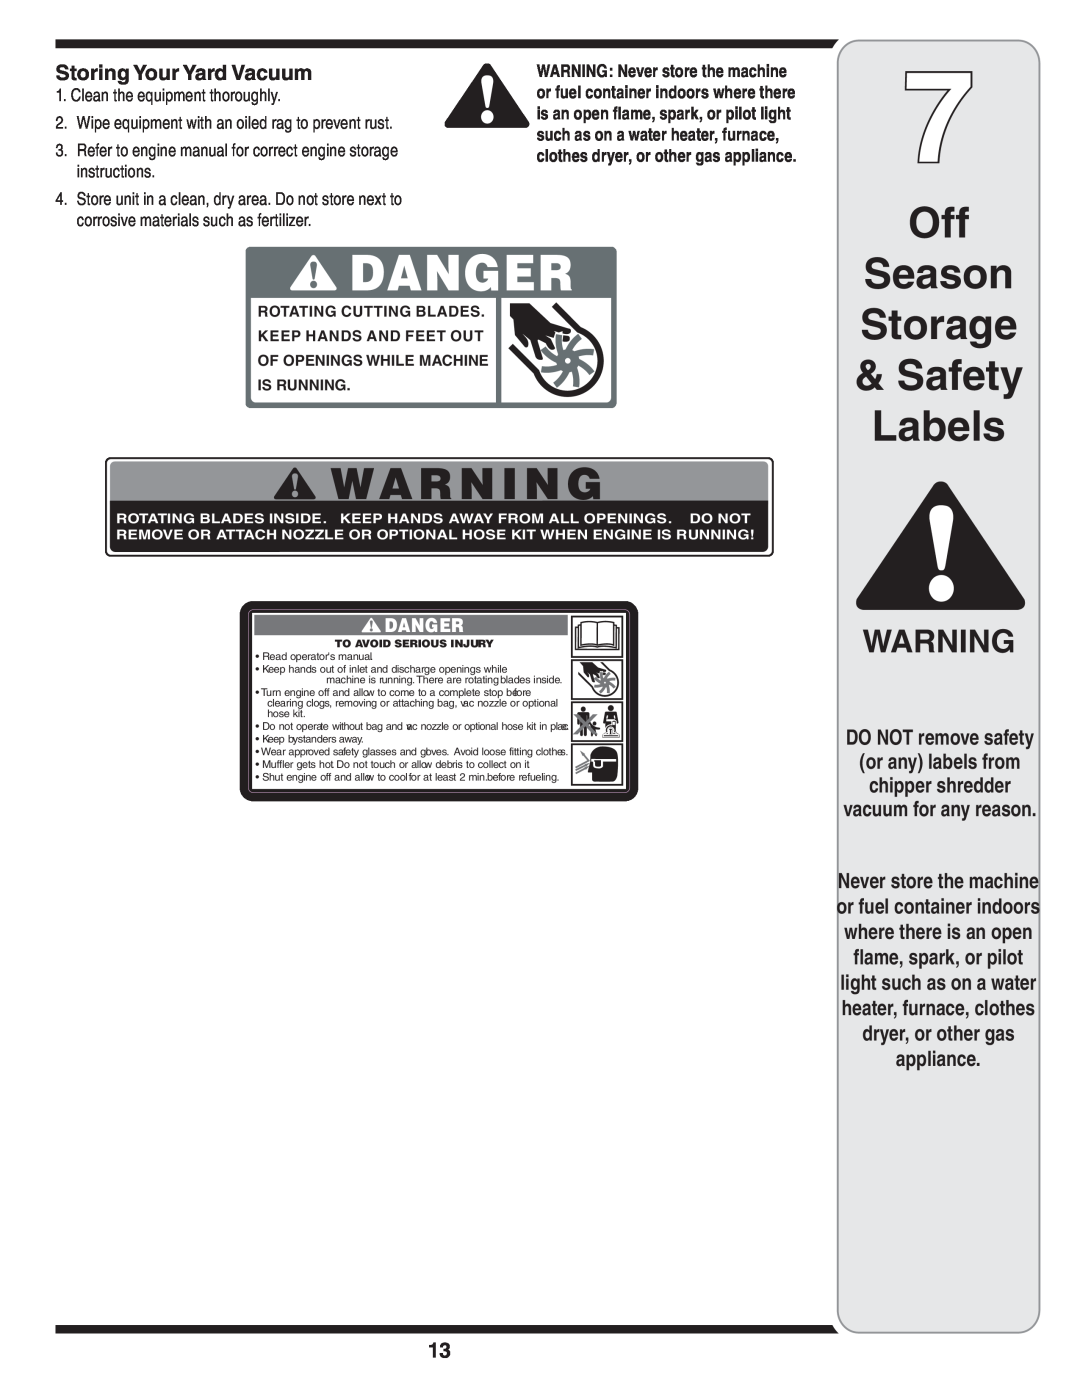 Troy-Bilt 204 warranty Season Storage Safety Labels, Storing Your Yard Vacuum, vacuum for any reason, Danger, S30183 